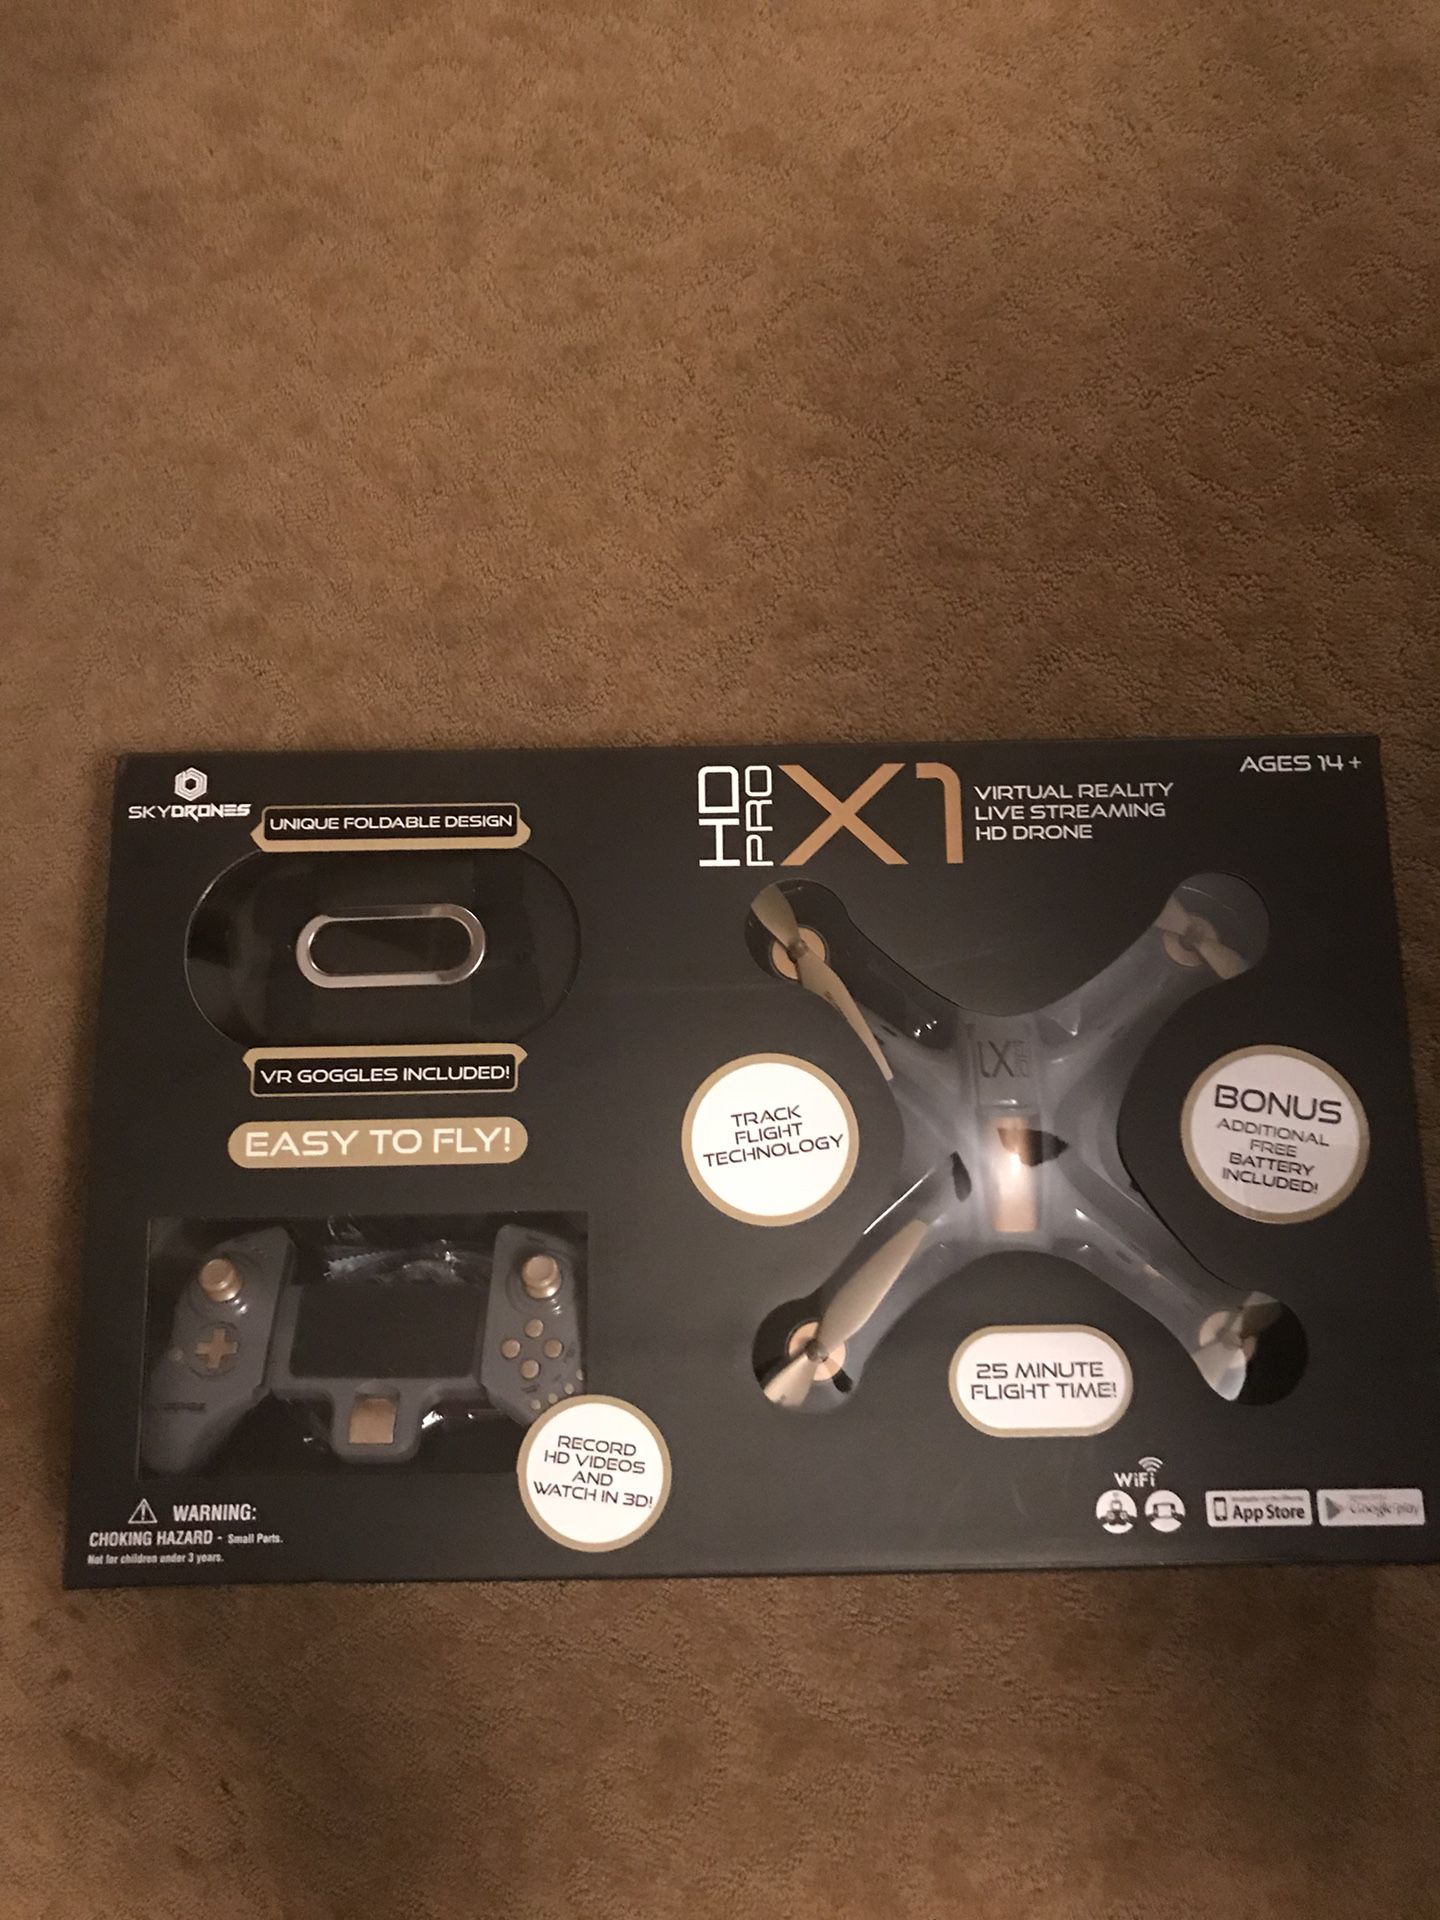 2 HD Pro X1 drone with virtual reality goggles